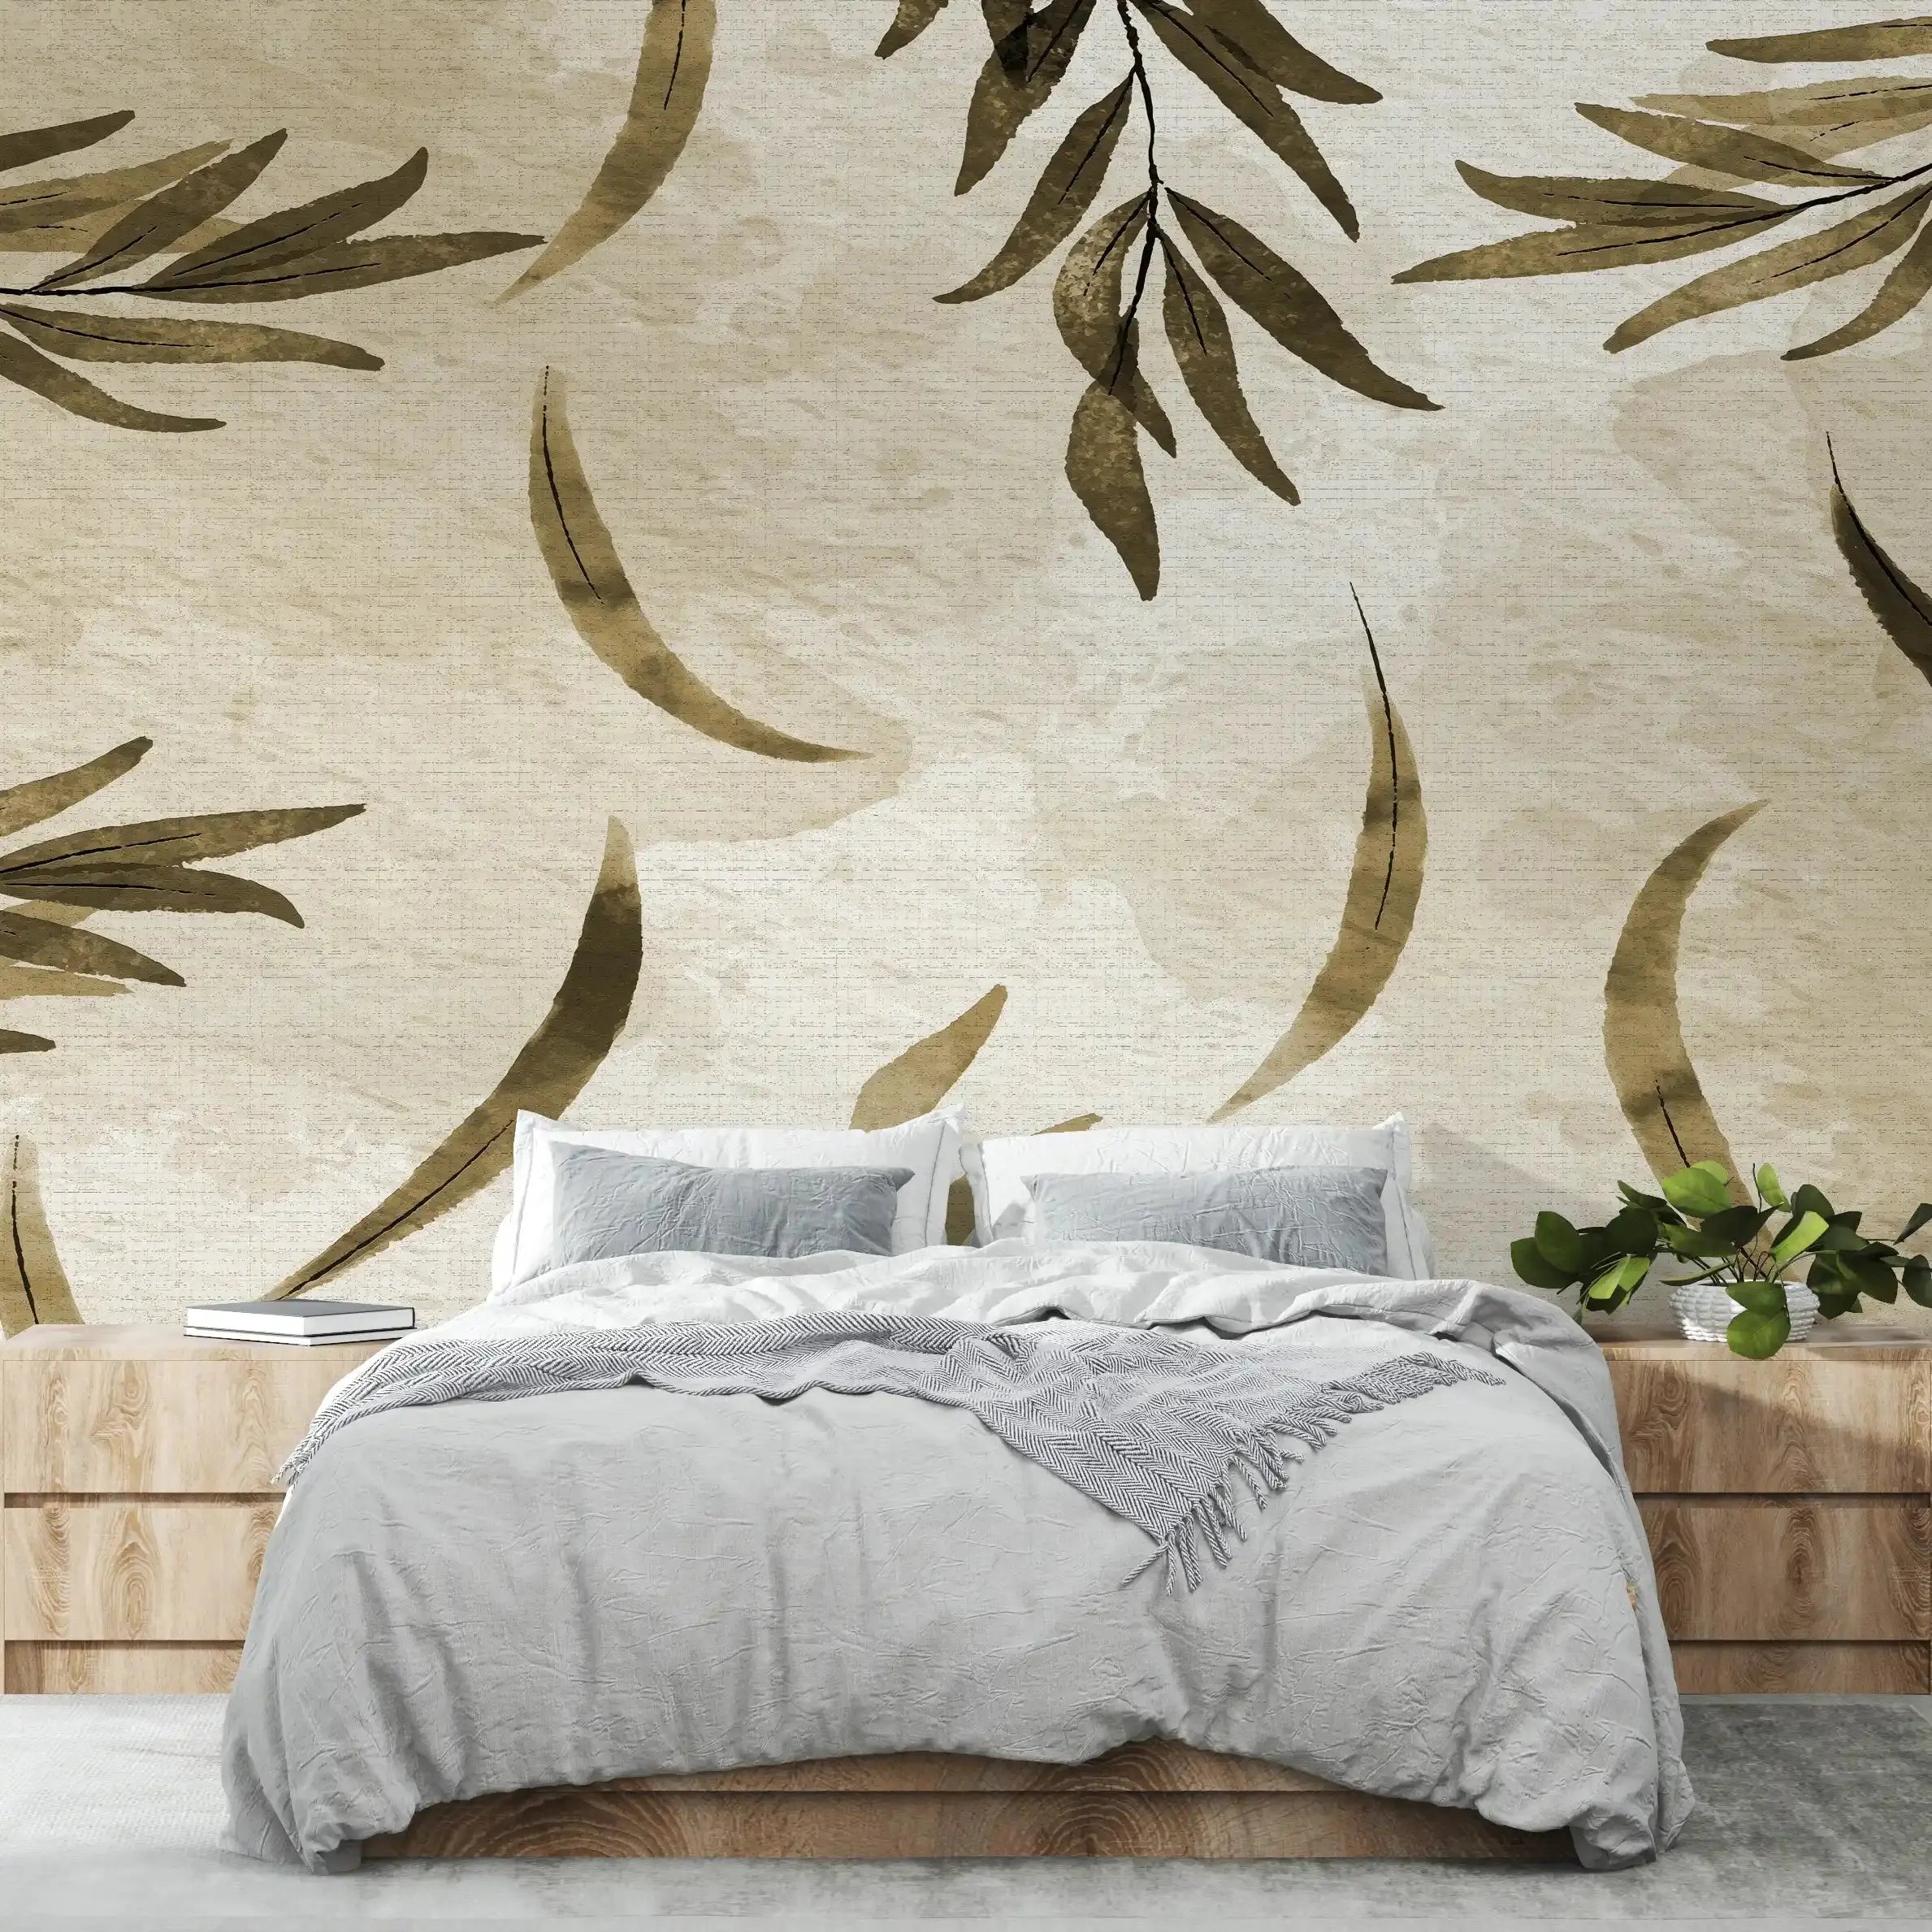 3032-F / Floral Peel and Stick Wallpaper: Modern Boho Decor with Watercolor Branches Design, Ideal for Temporary or Renters Wallpaper - Artevella